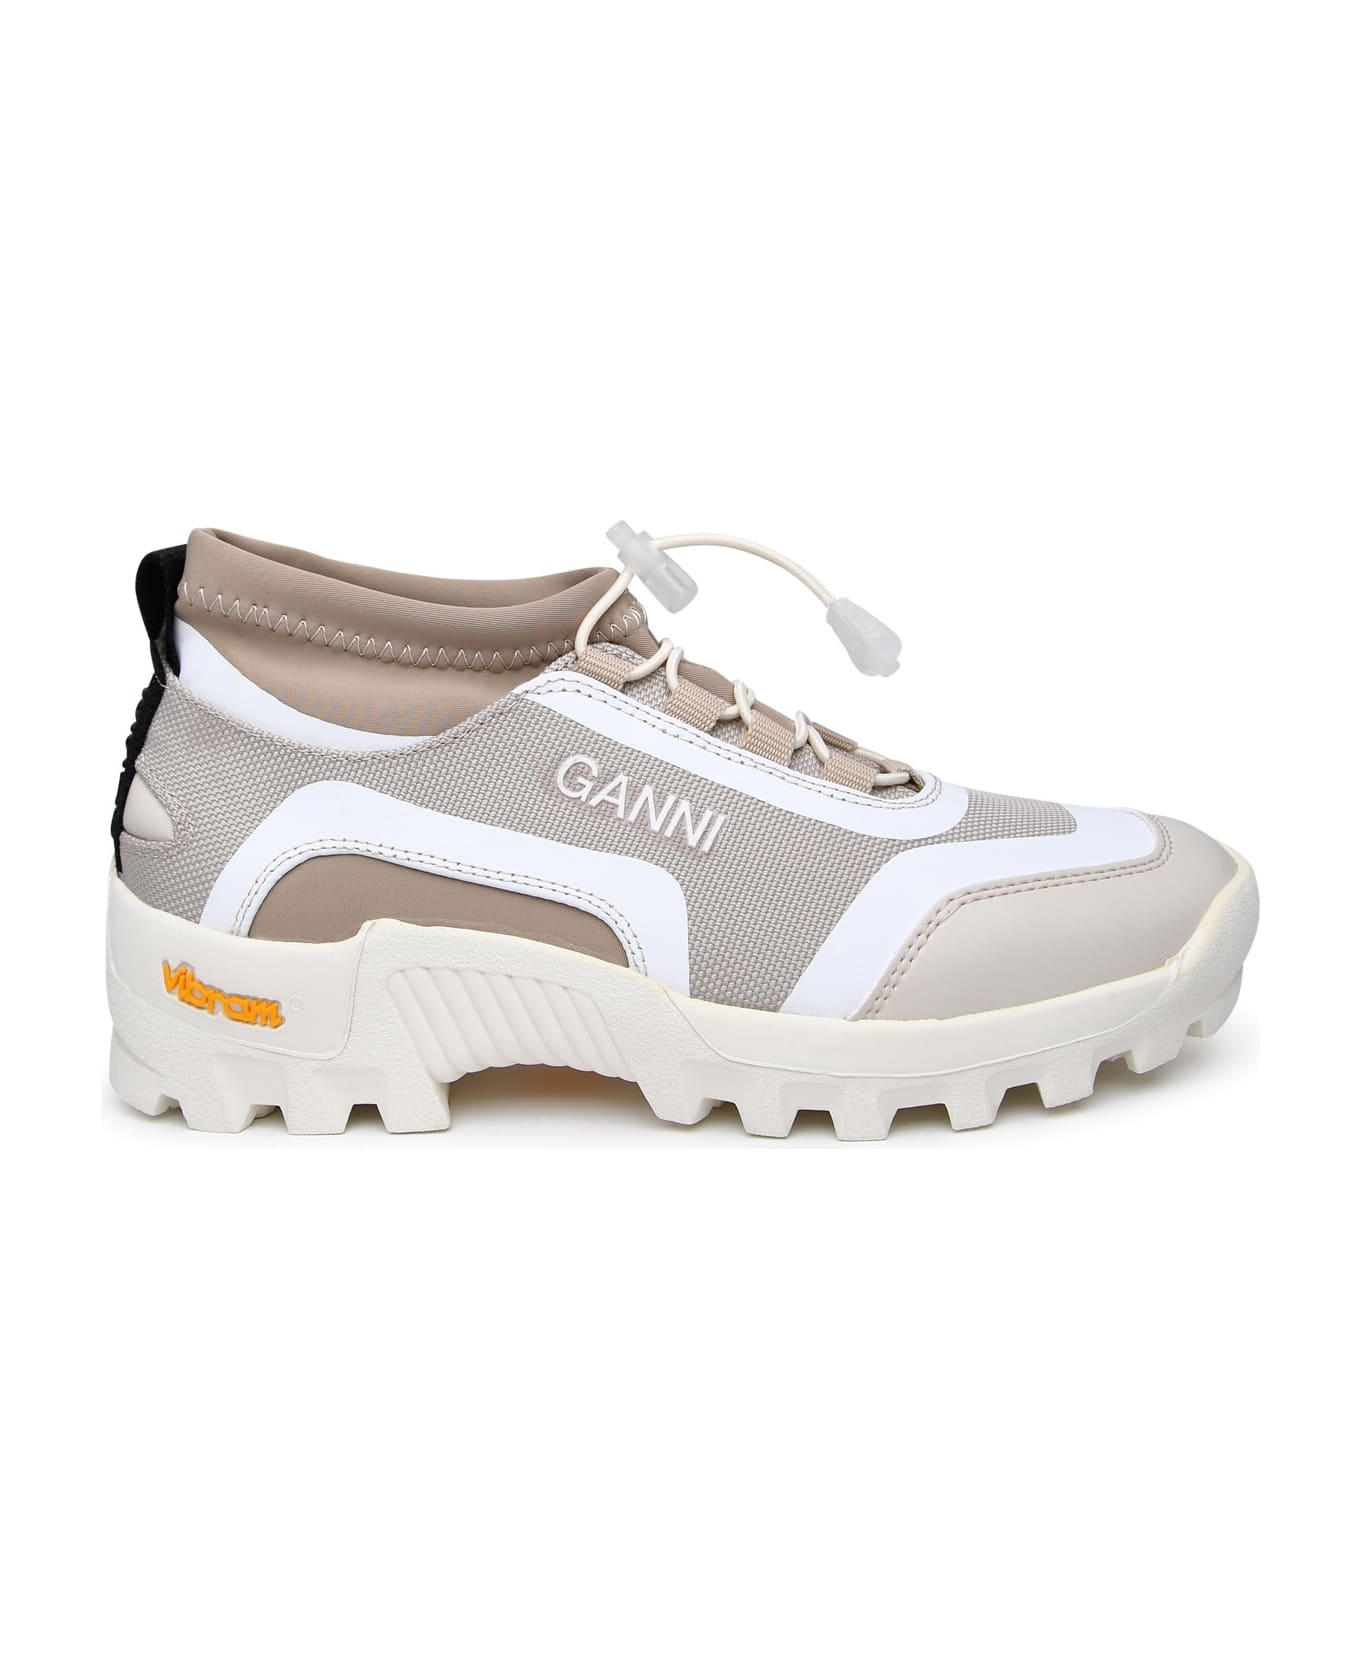 Ganni Performance Two-tone Recycled Polyester Sneakers - Multicolor